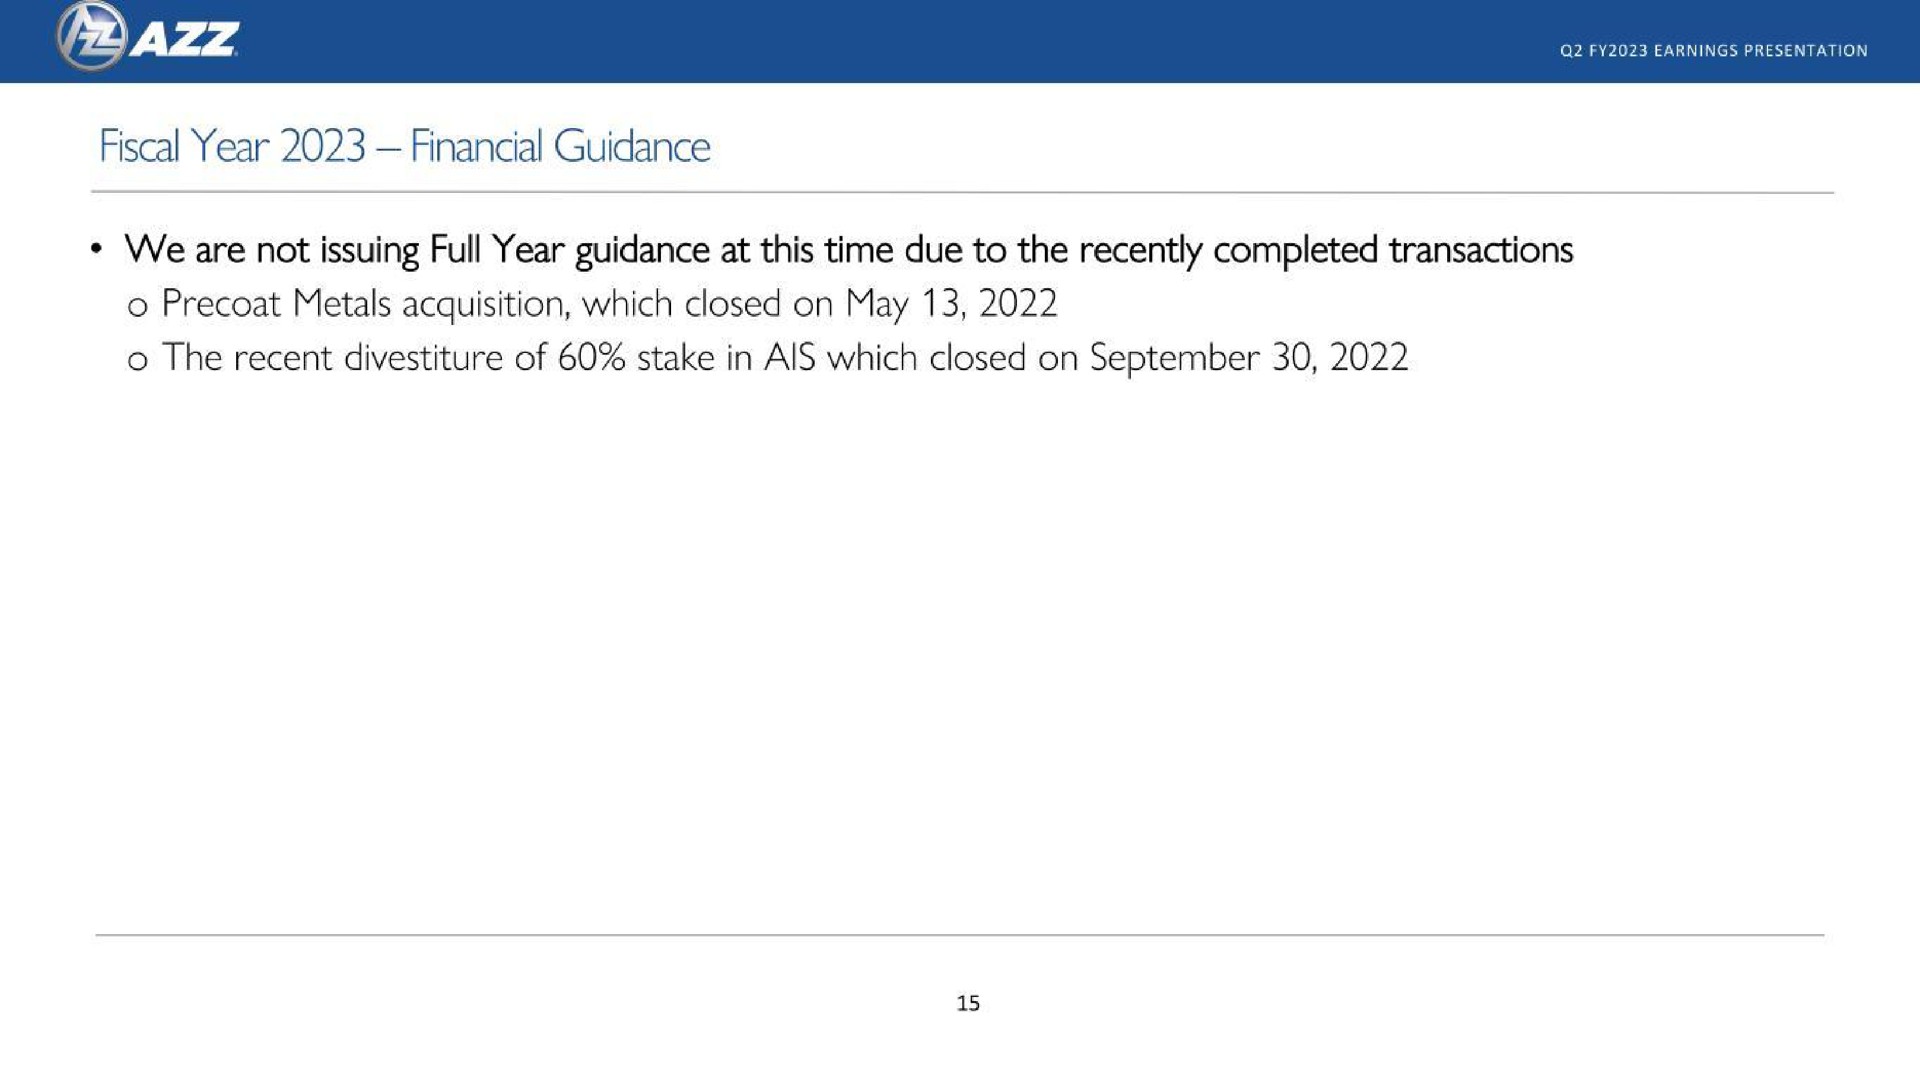 fiscal year financial guidance we are not issuing full year guidance at this time due to the recently completed transactions metals acquisition which closed on may the recent divestiture of stake in ais which closed on | AZZ